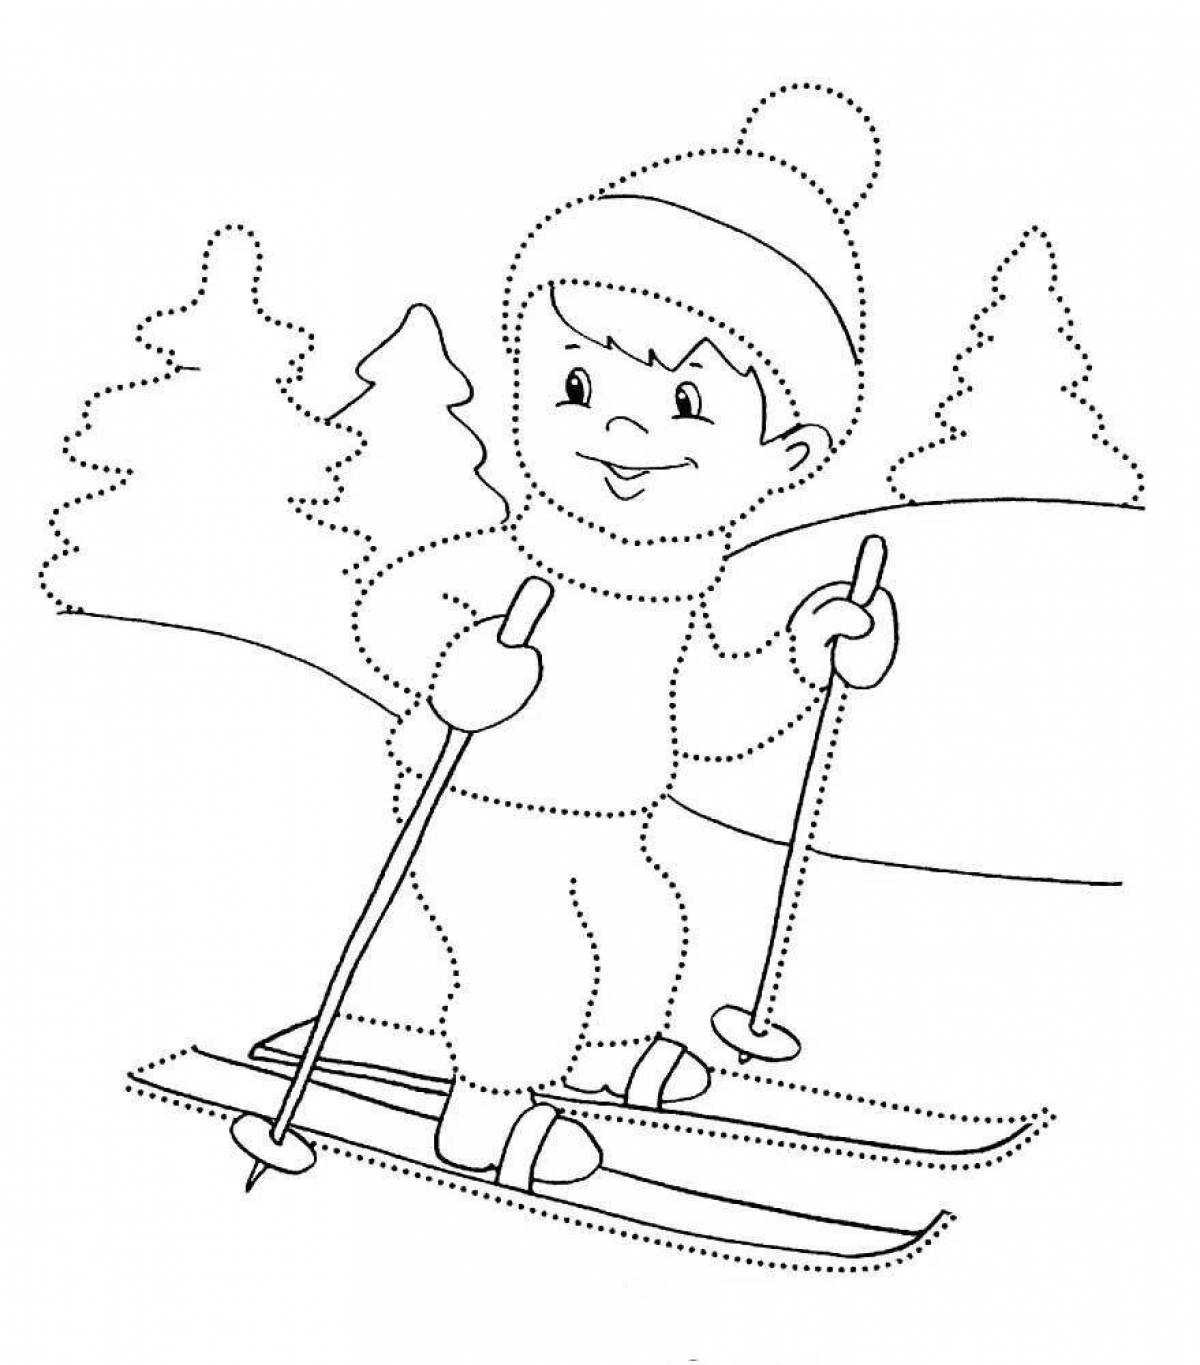 Glow skis coloring book for kids